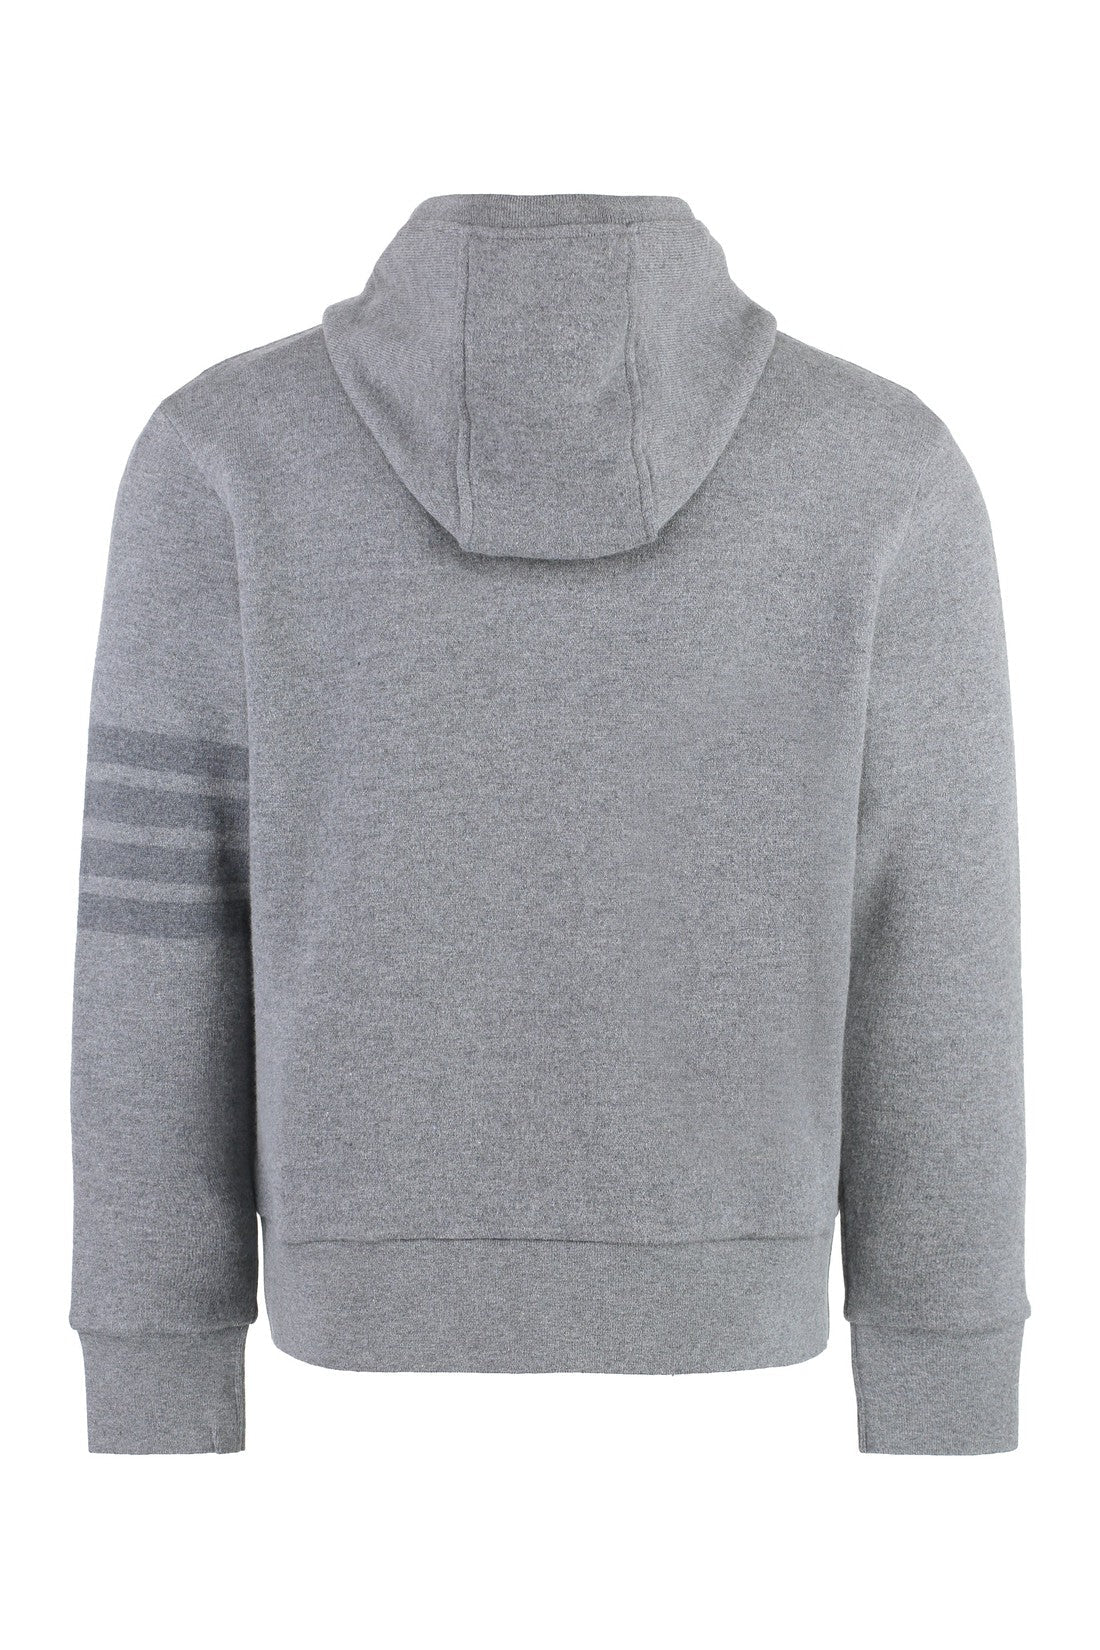 Thom Browne-OUTLET-SALE-Knitted hoodie-ARCHIVIST